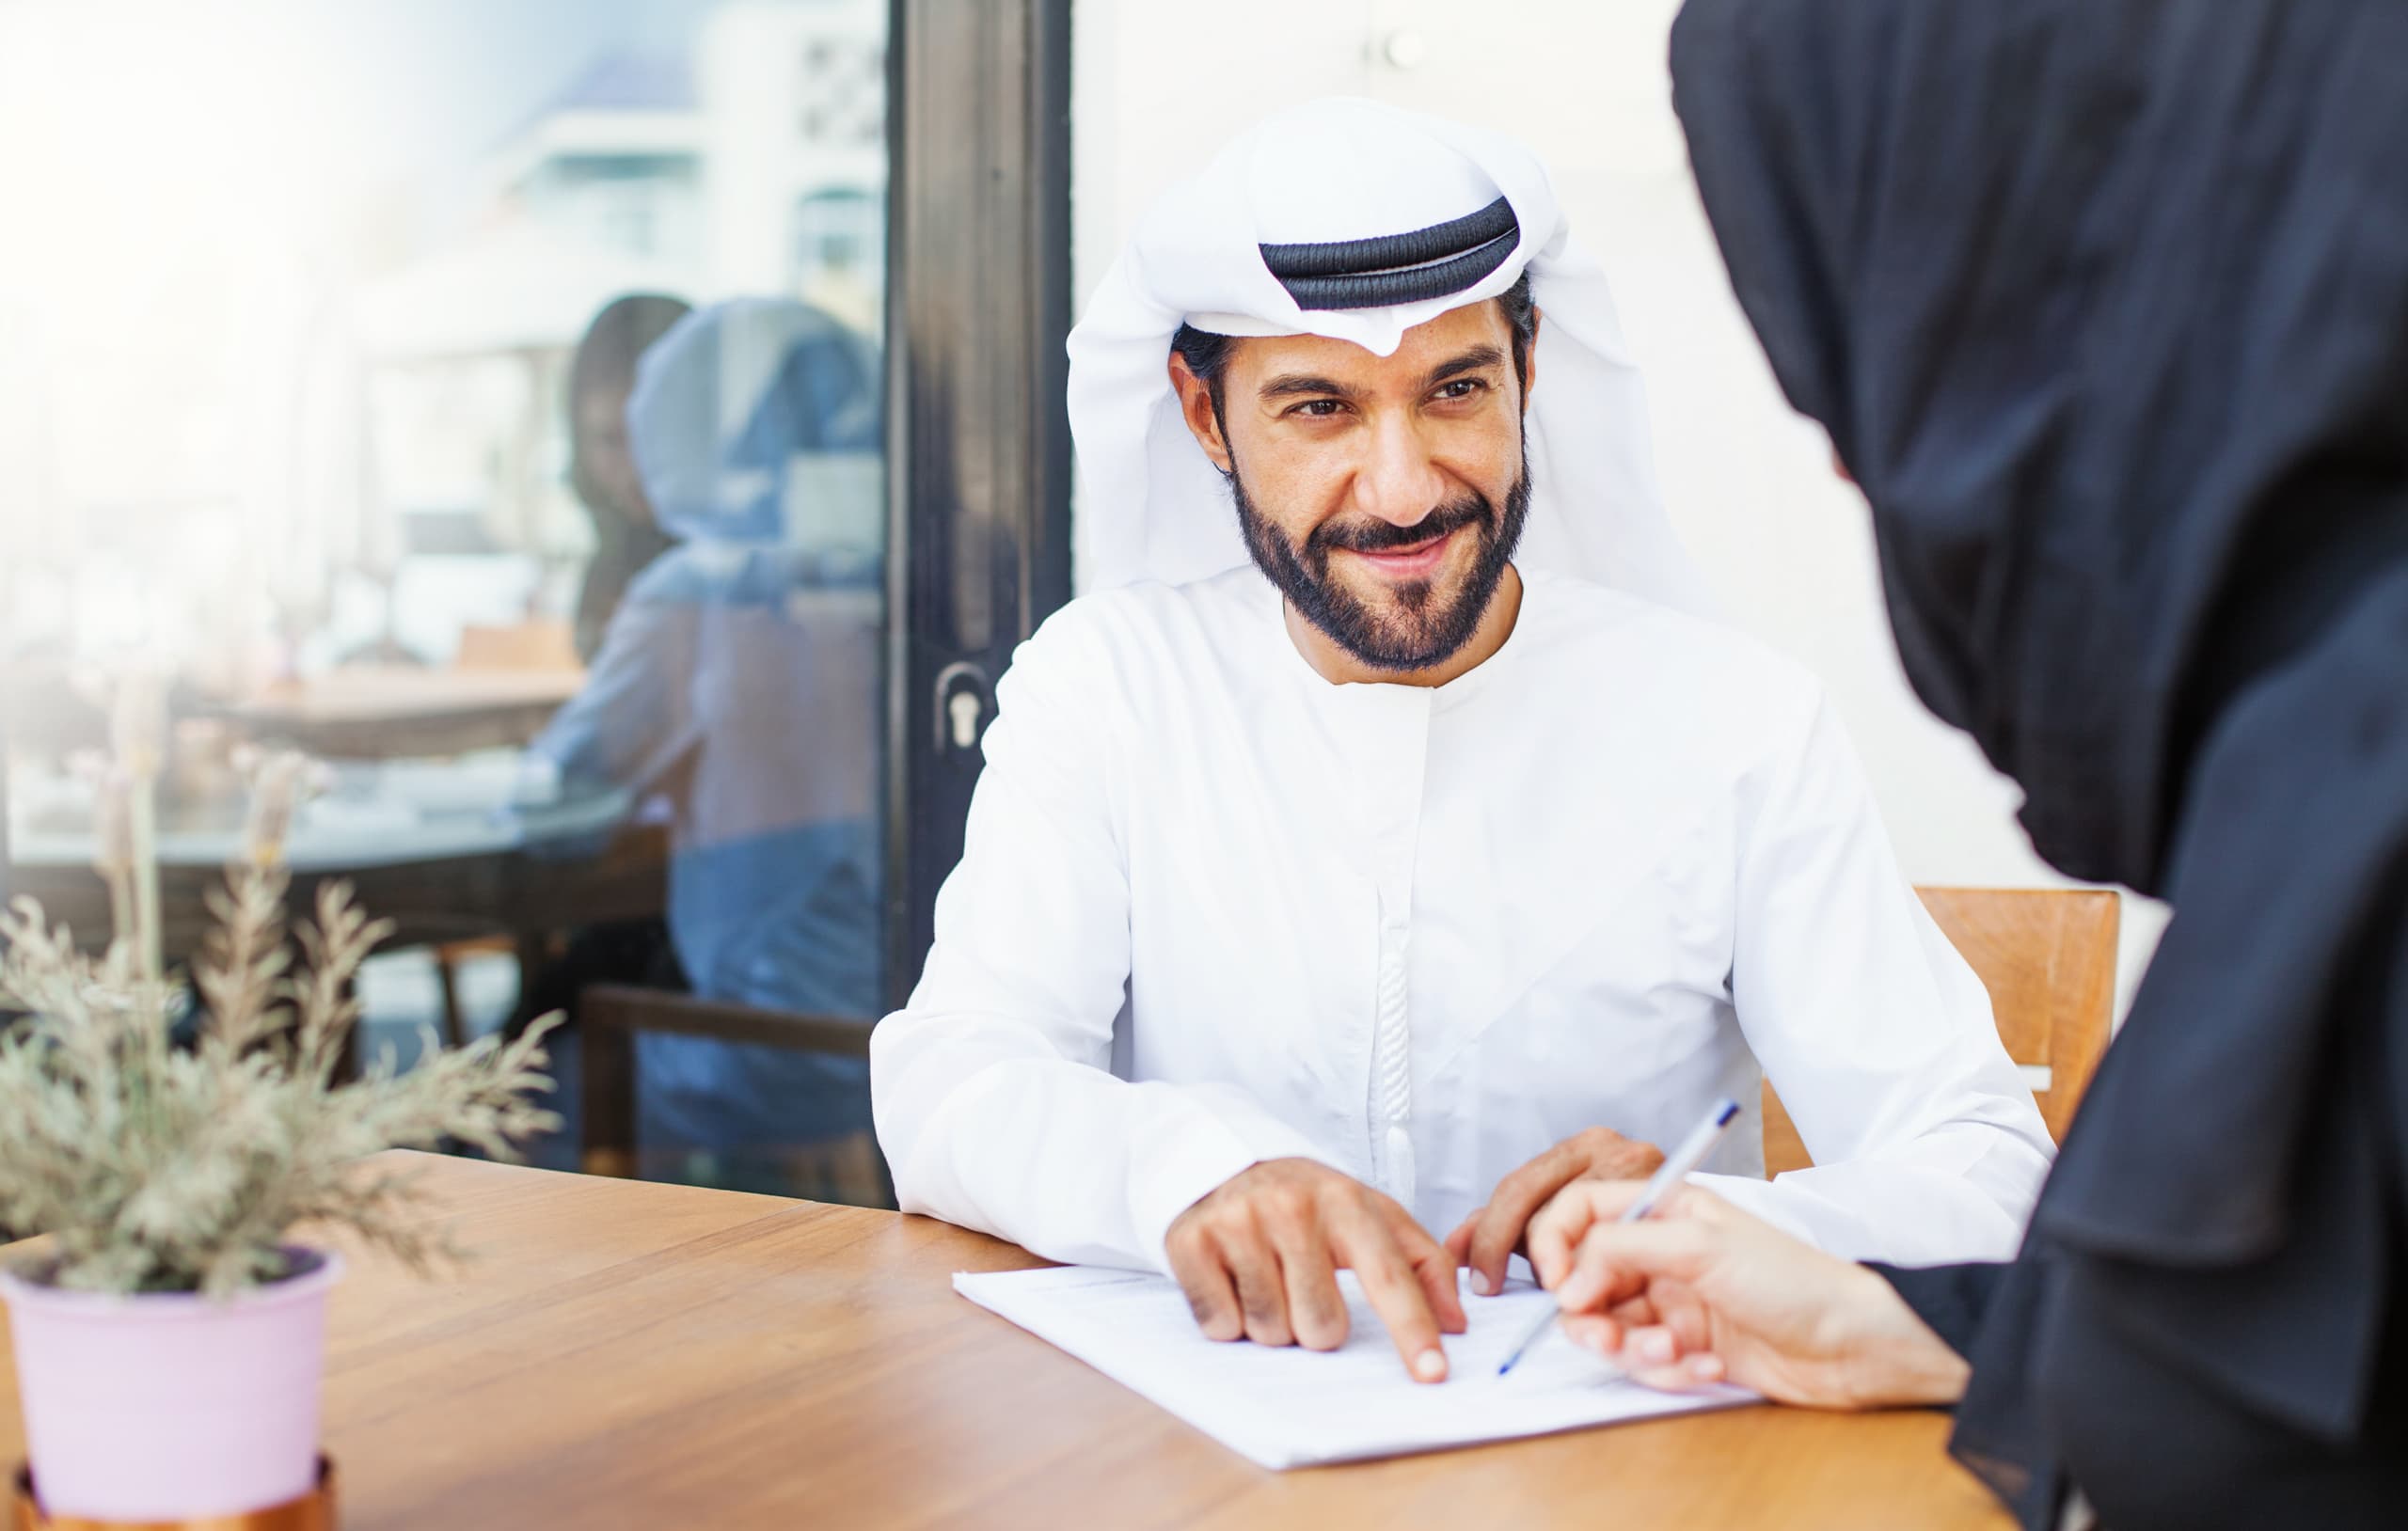 Arab,Man,Giving,Documents,To,Sign,To,A,Woman,In